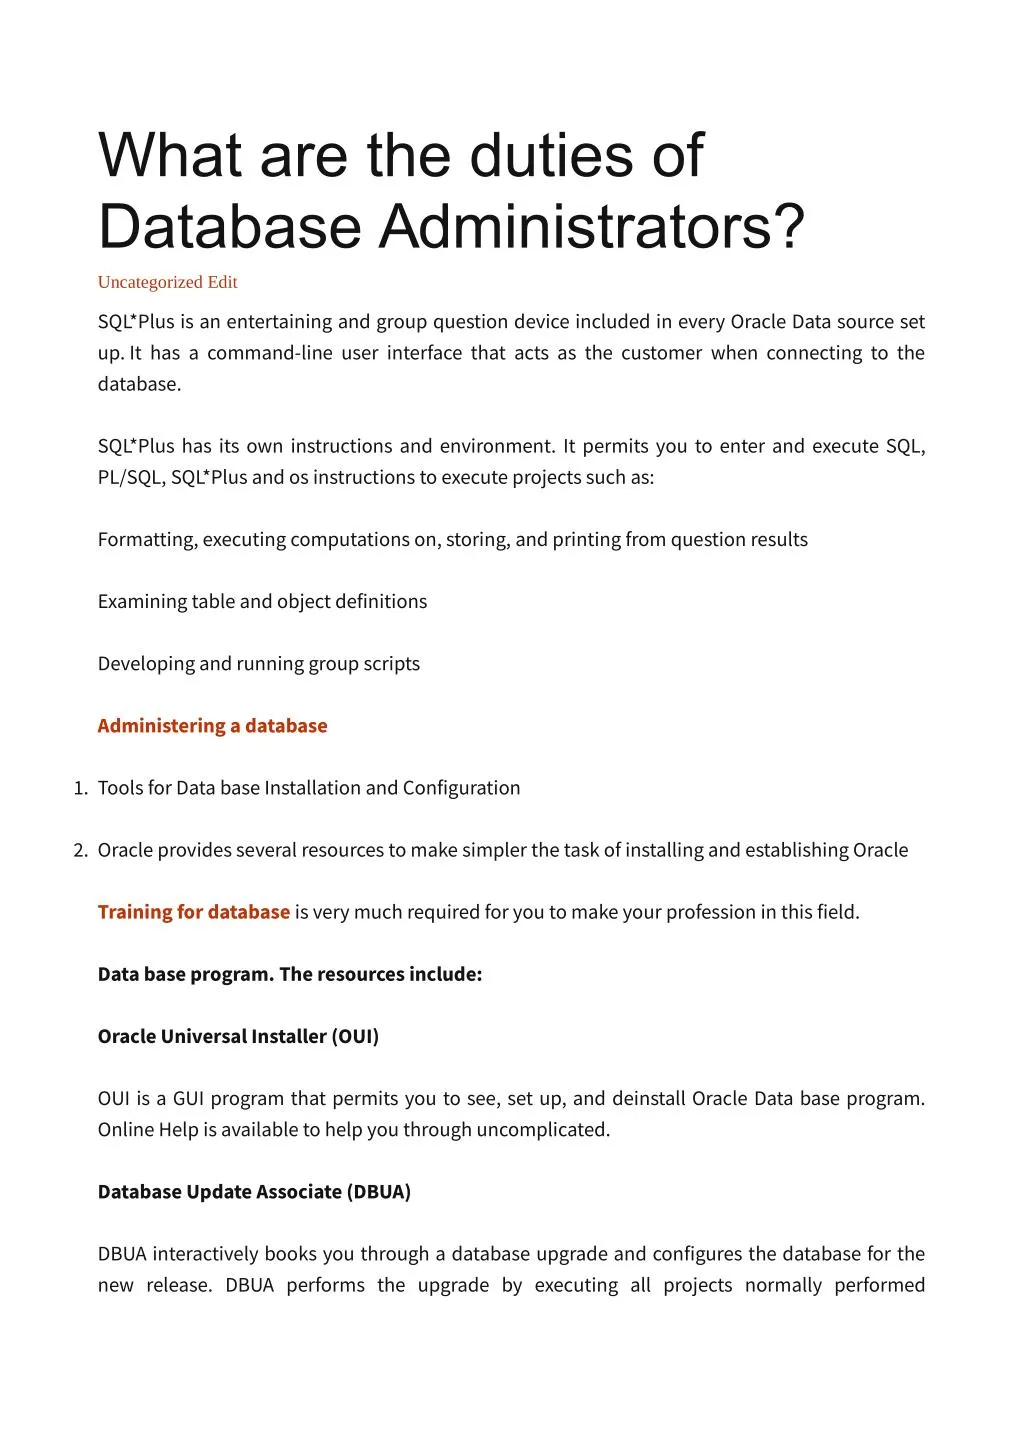 what are the duties of database administrators